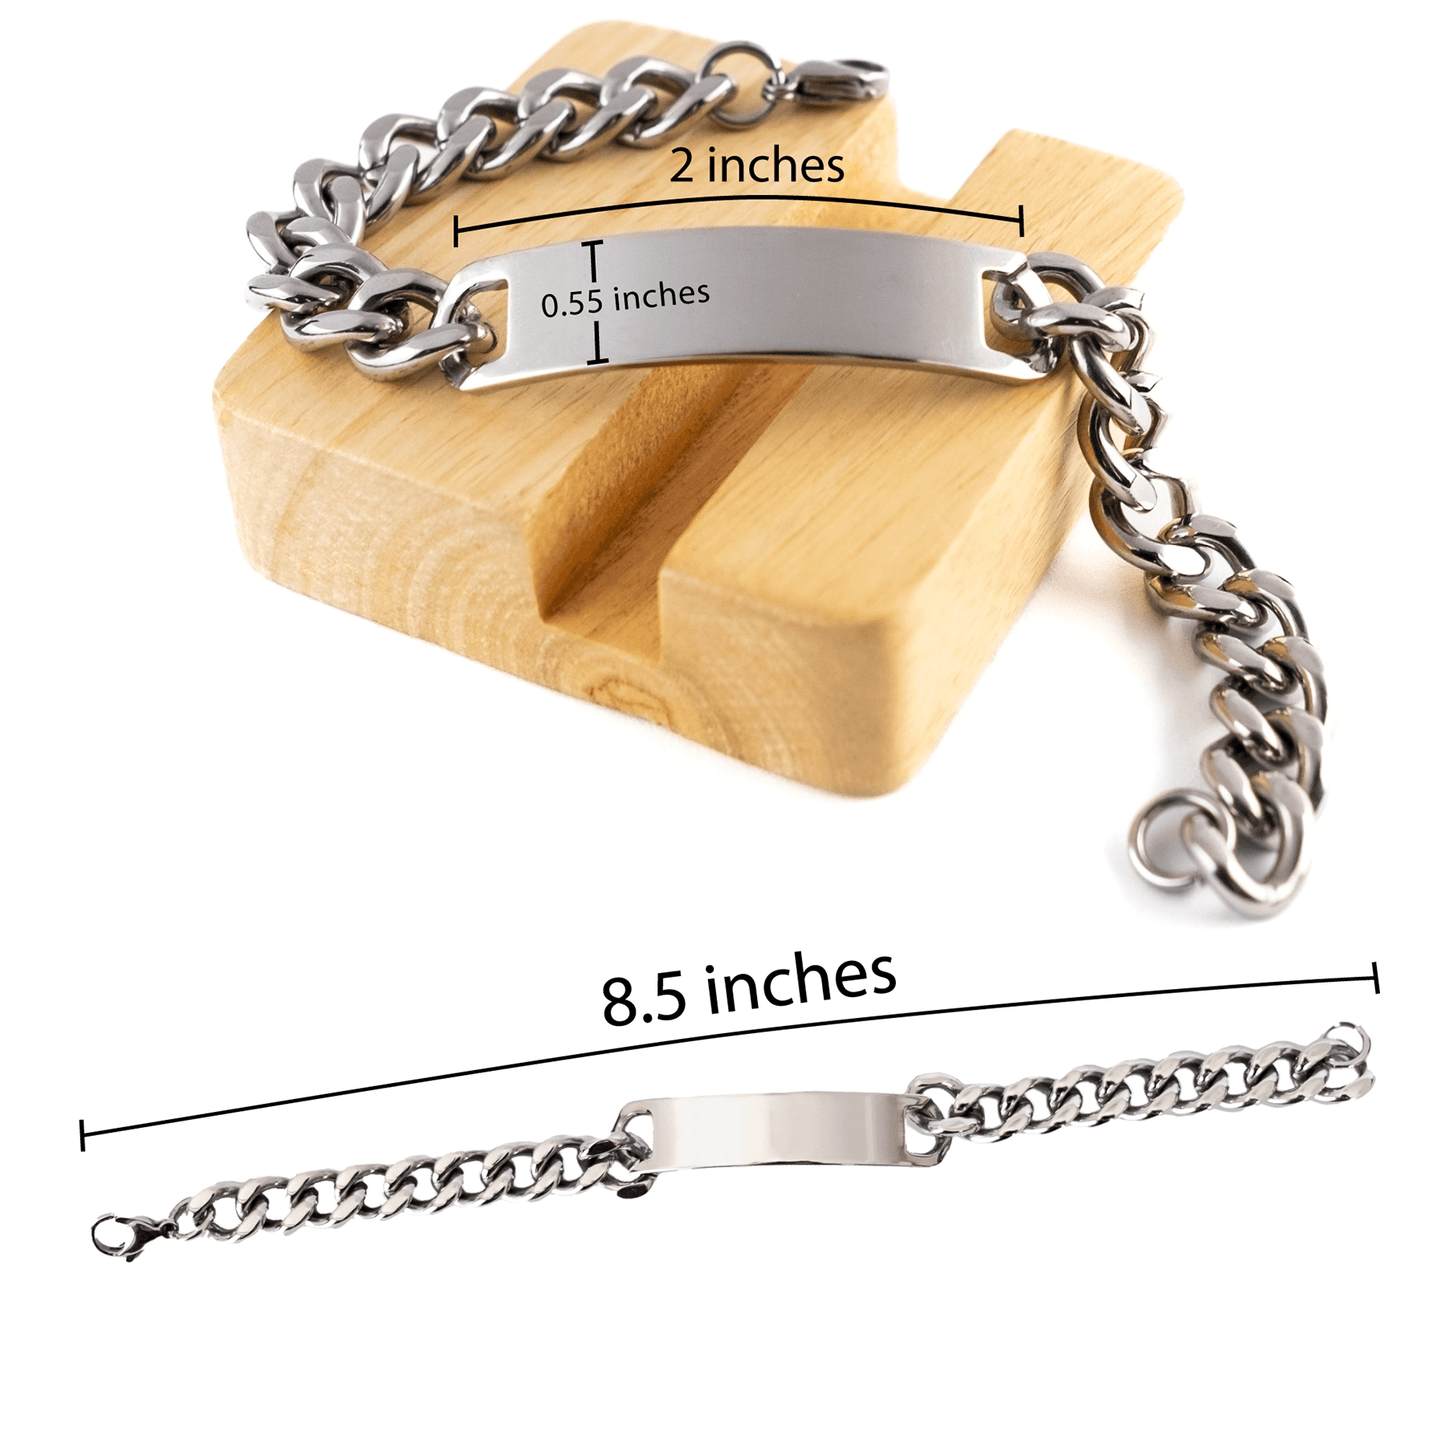 Father Christmas Perfect Gifts, Father Cuban Chain Stainless Steel Bracelet, Motivational Father Engraved Gifts, Birthday Gifts For Father, To My Father Life is learning to dance in the rain, finding good in each day. I'm always with you - Mallard Moon Gift Shop